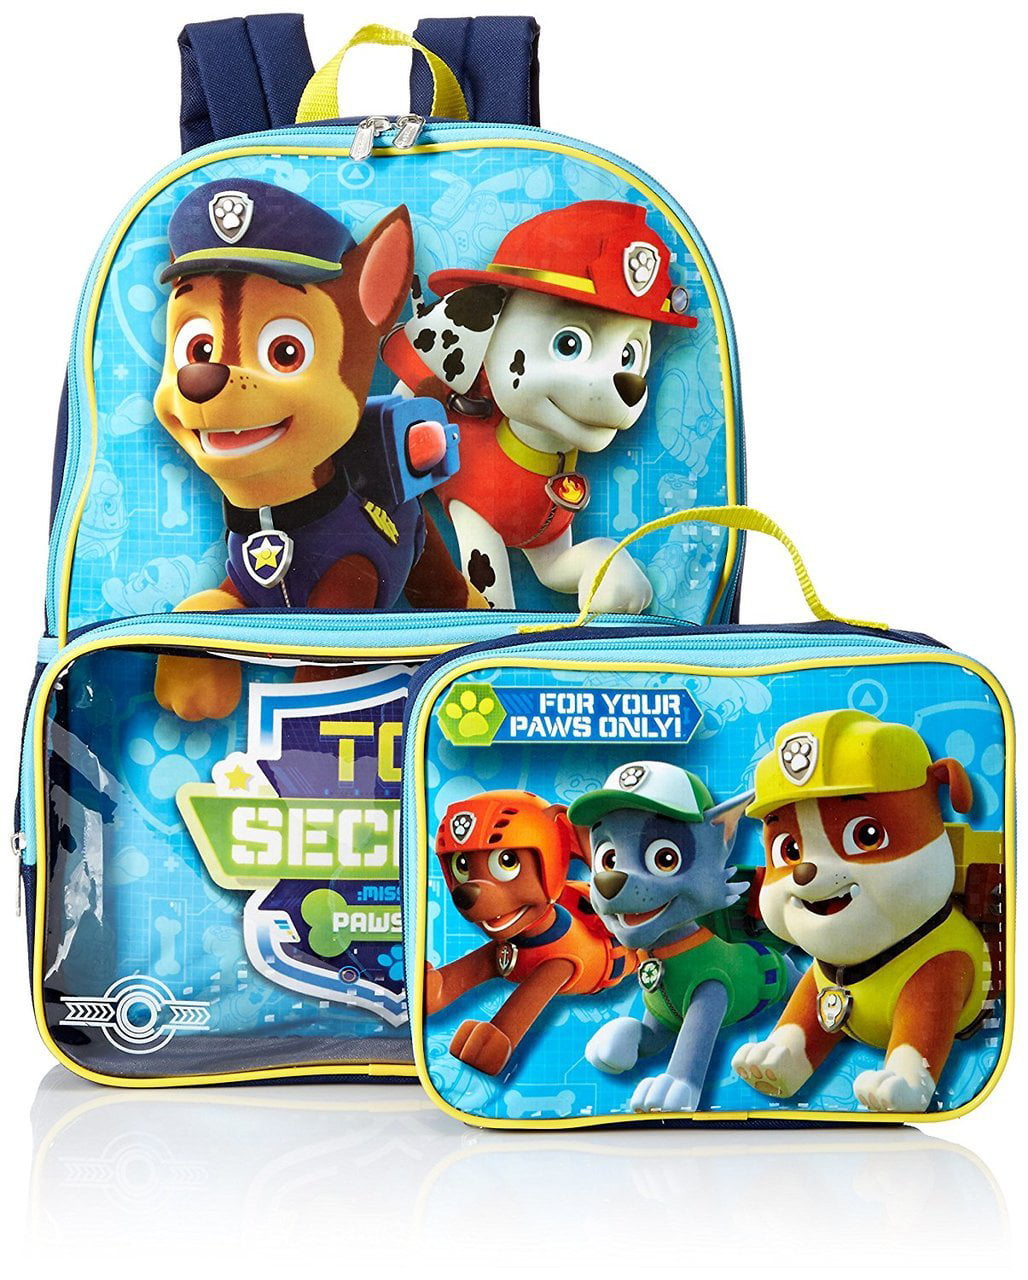 Paw Patrol Backpack with Lunchbox - green/multi, one size - Walmart.com